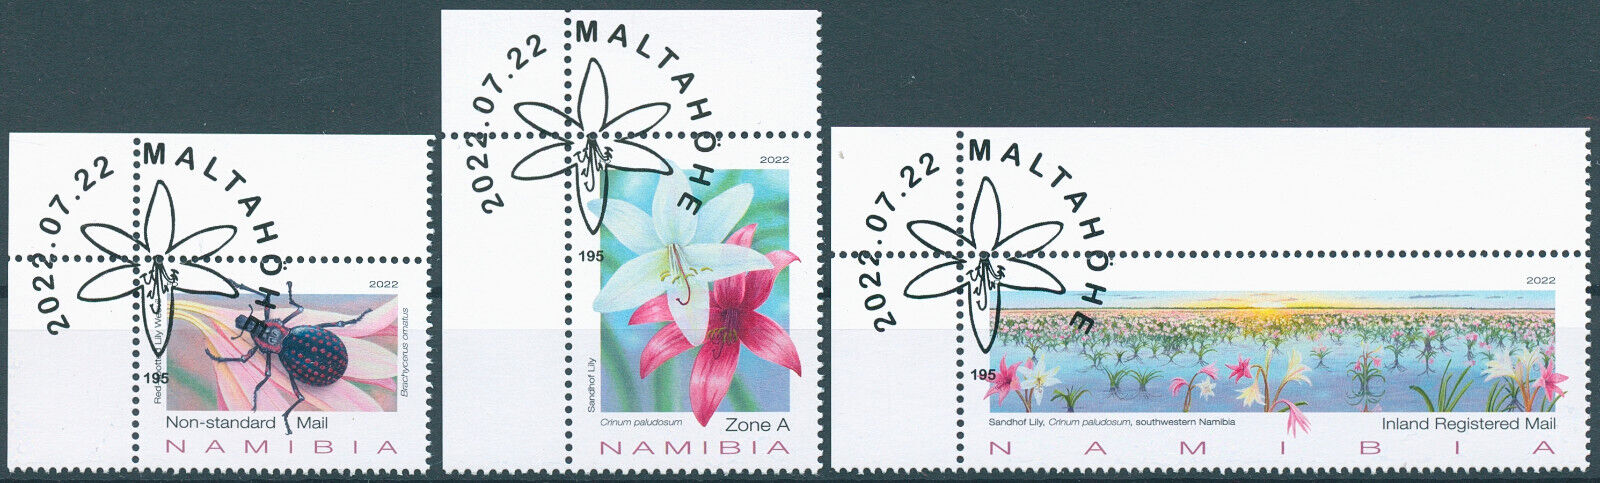 Namibia 2022 CTO Flowers Stamps Sandhof Lily Lilies Beetles Flora Nature 3v Set